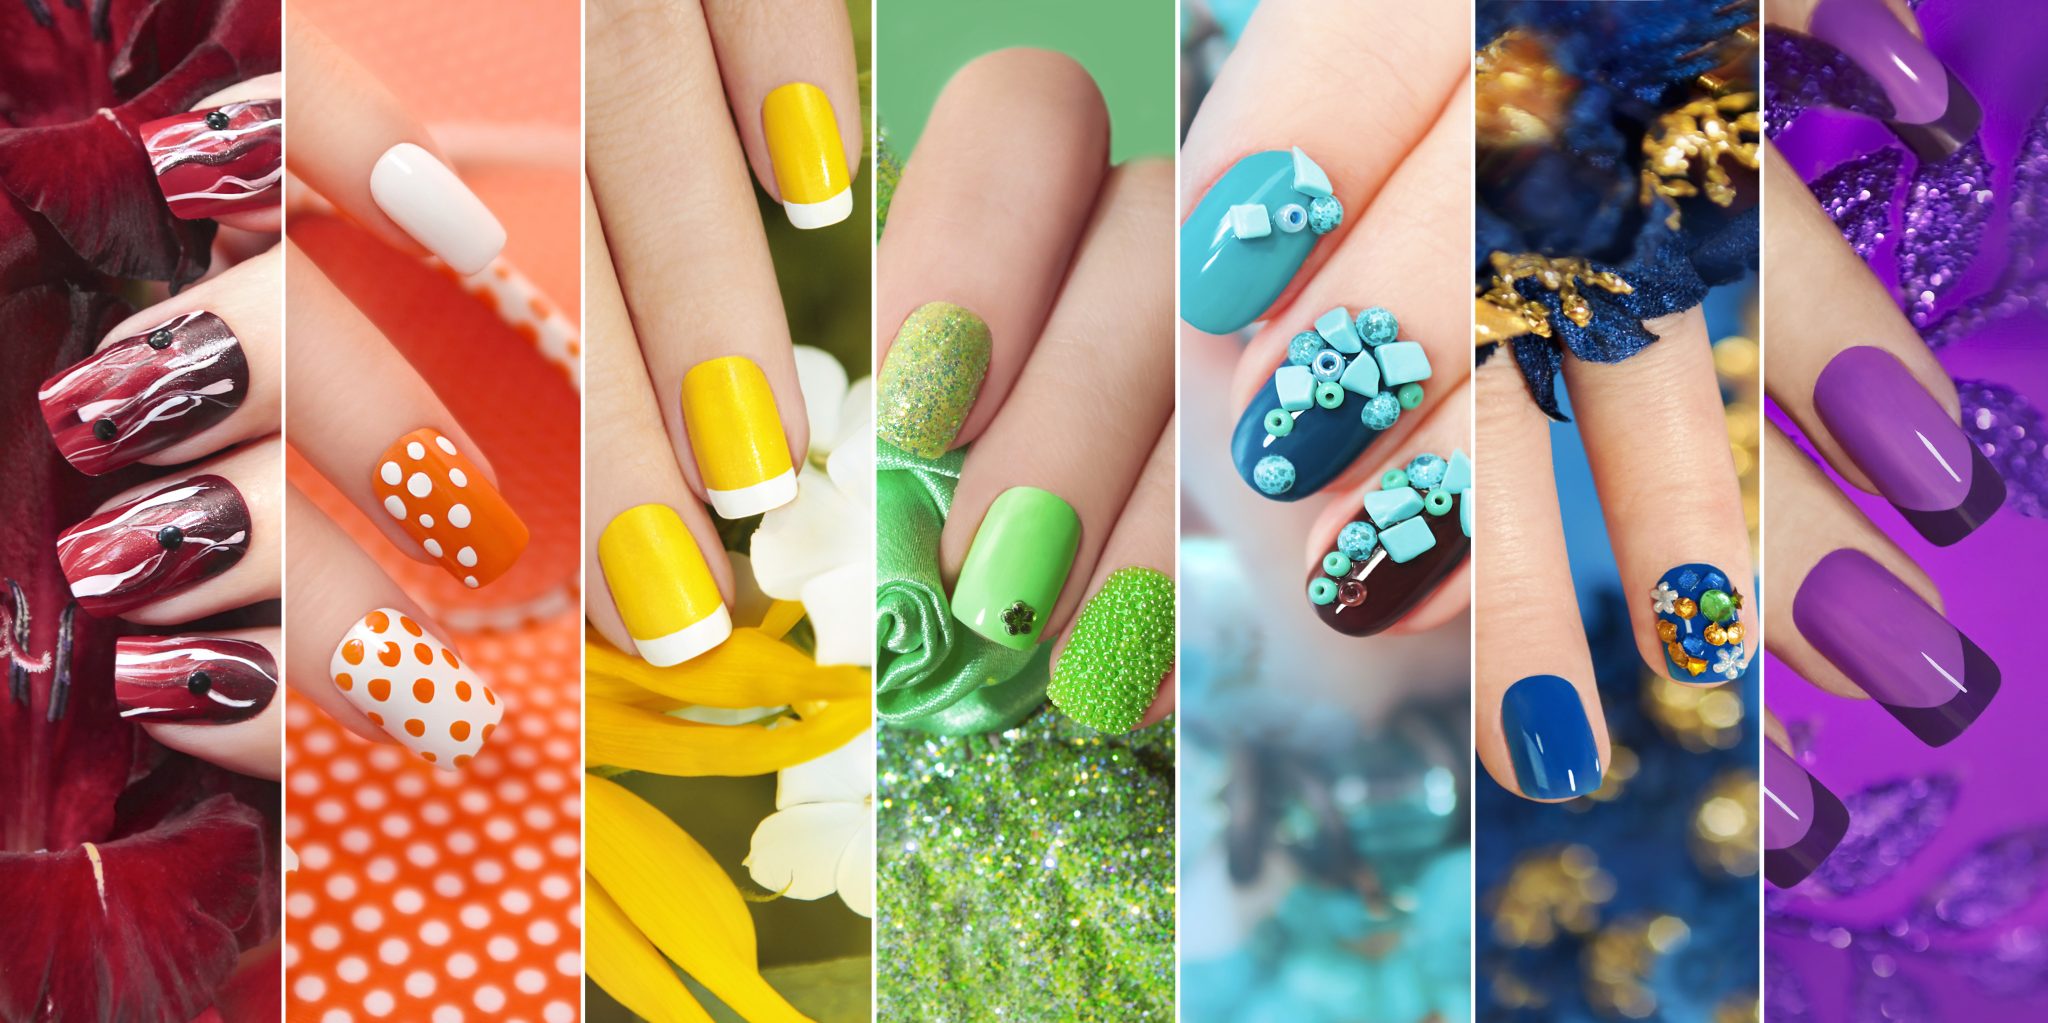 5. 15 Beautiful Nail Designs for Every Occasion - wide 8